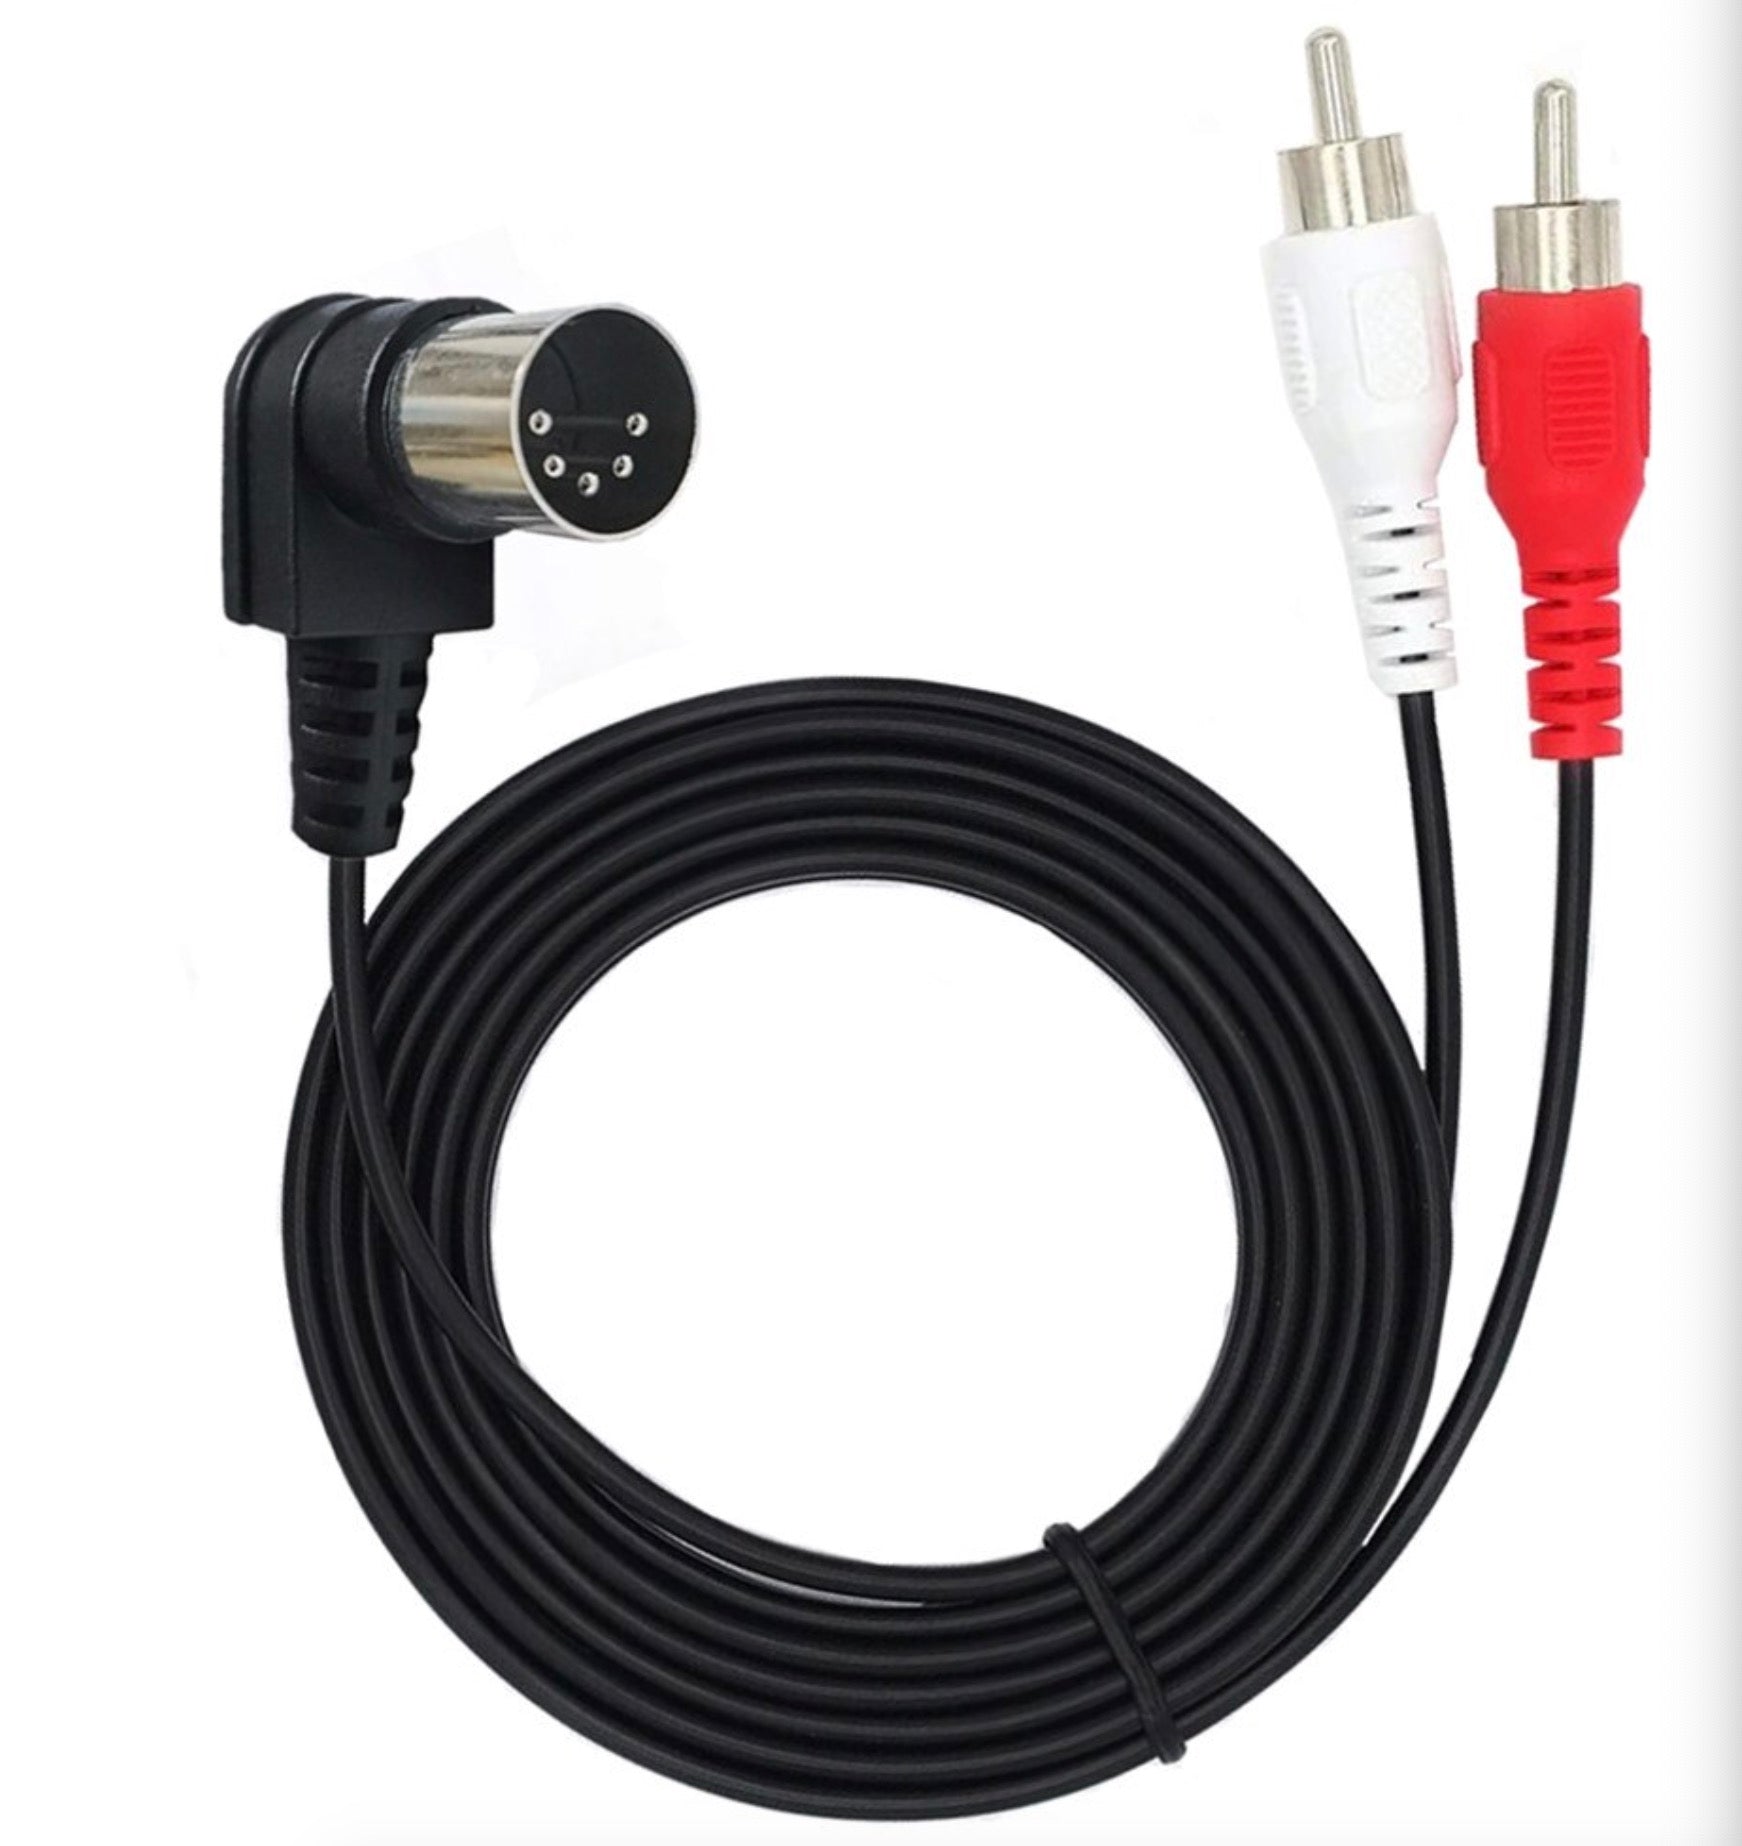 90 Angle Midi 5-Pin Din Male to 2 RCA Phono Male Plugs Audio Lead Cord for Bang & Olufsen, Naim, Quad, Stereo Systems